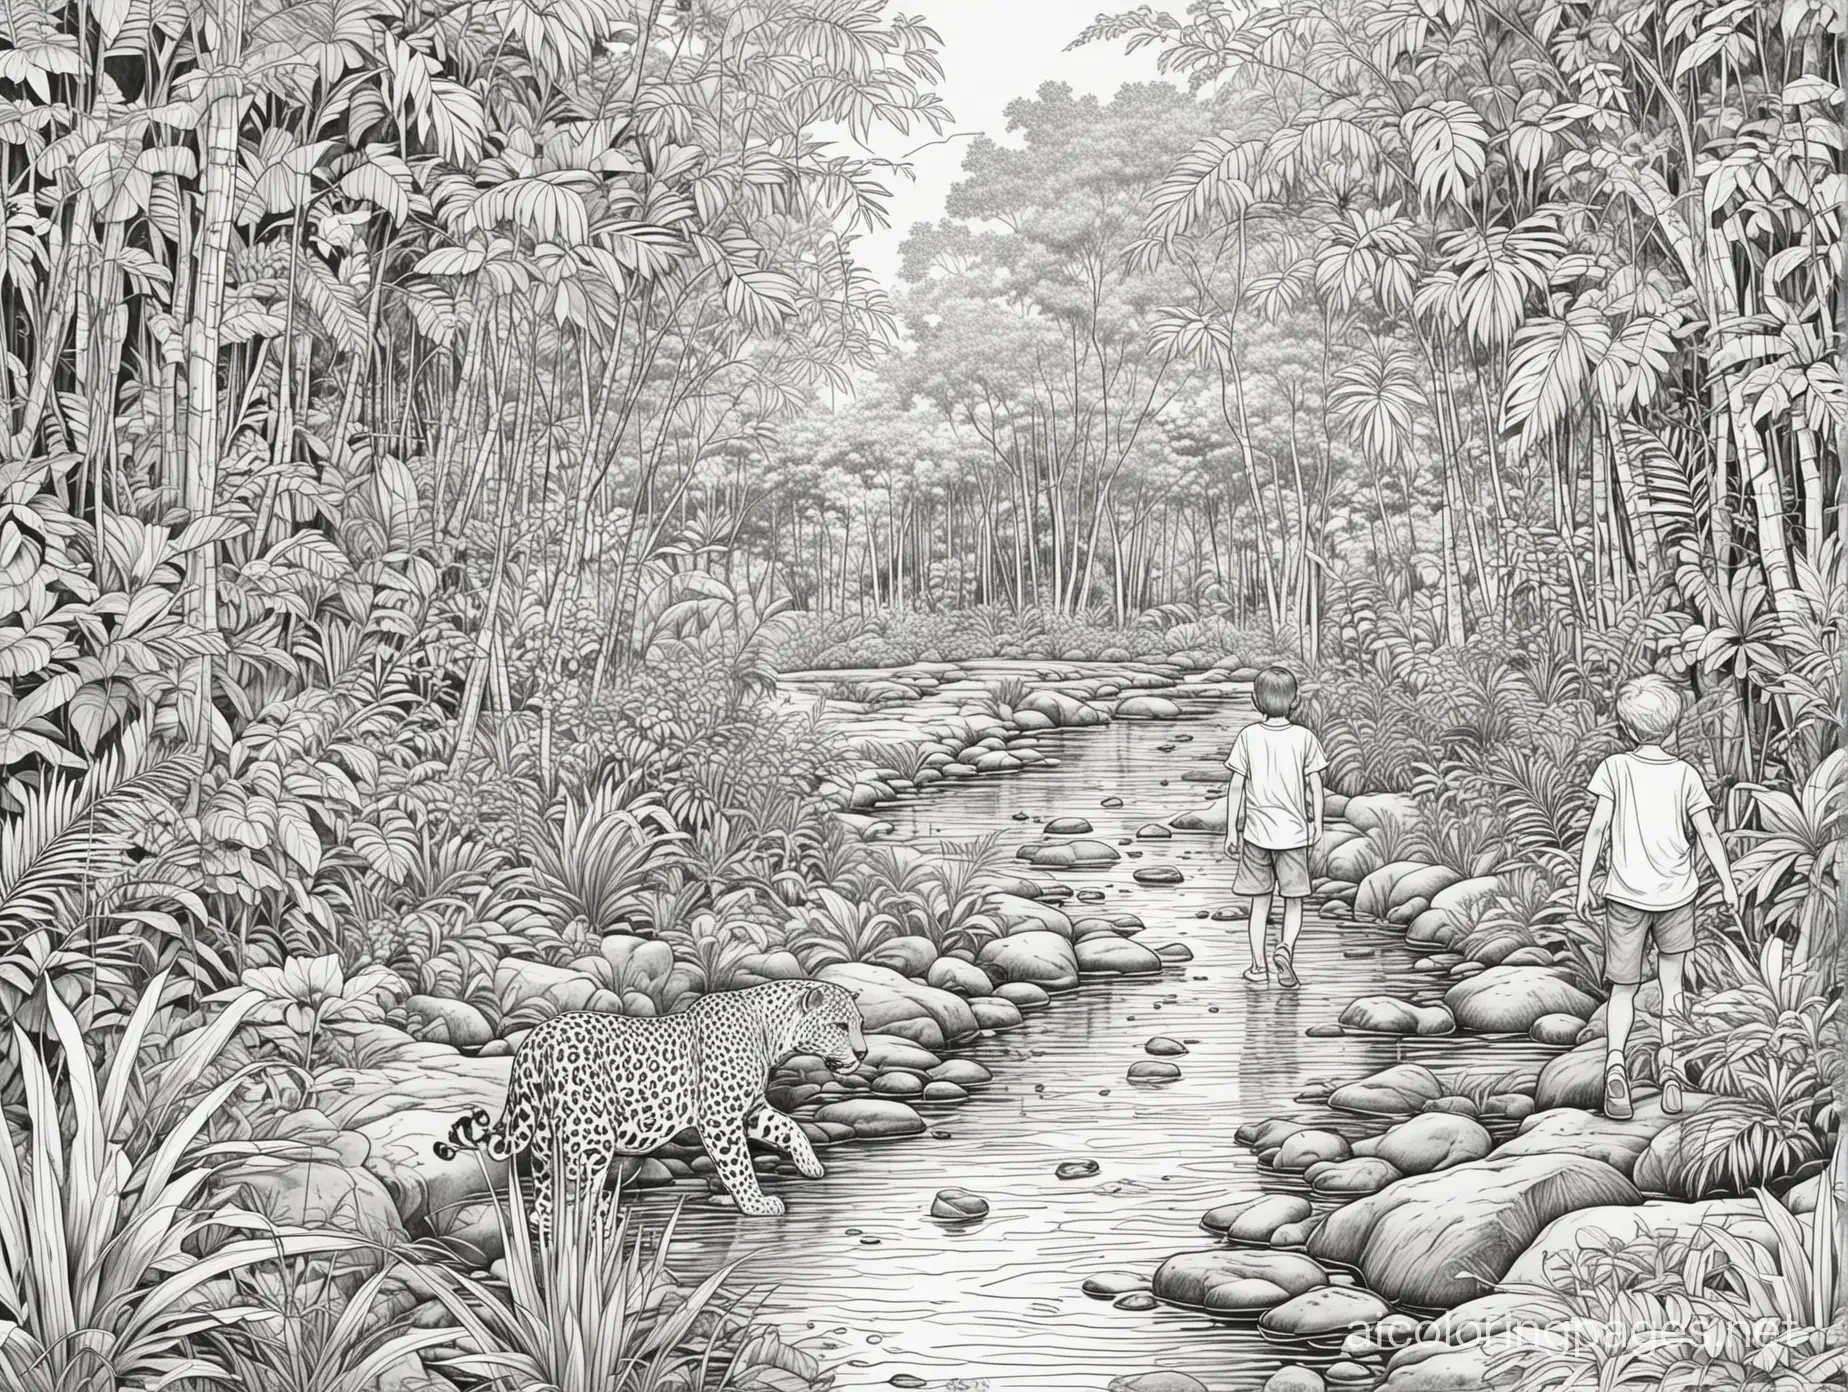 boy and girl walking in a beautiful tropical forest aside a small stream, with a jaguar watching them from the other side of the stream, Coloring Page, black and white, line art, white background, Simplicity, Ample White Space. The background of the coloring page is plain white to make it easy for young children to color within the lines. The outlines of all the subjects are easy to distinguish, making it simple for kids to color without too much difficulty